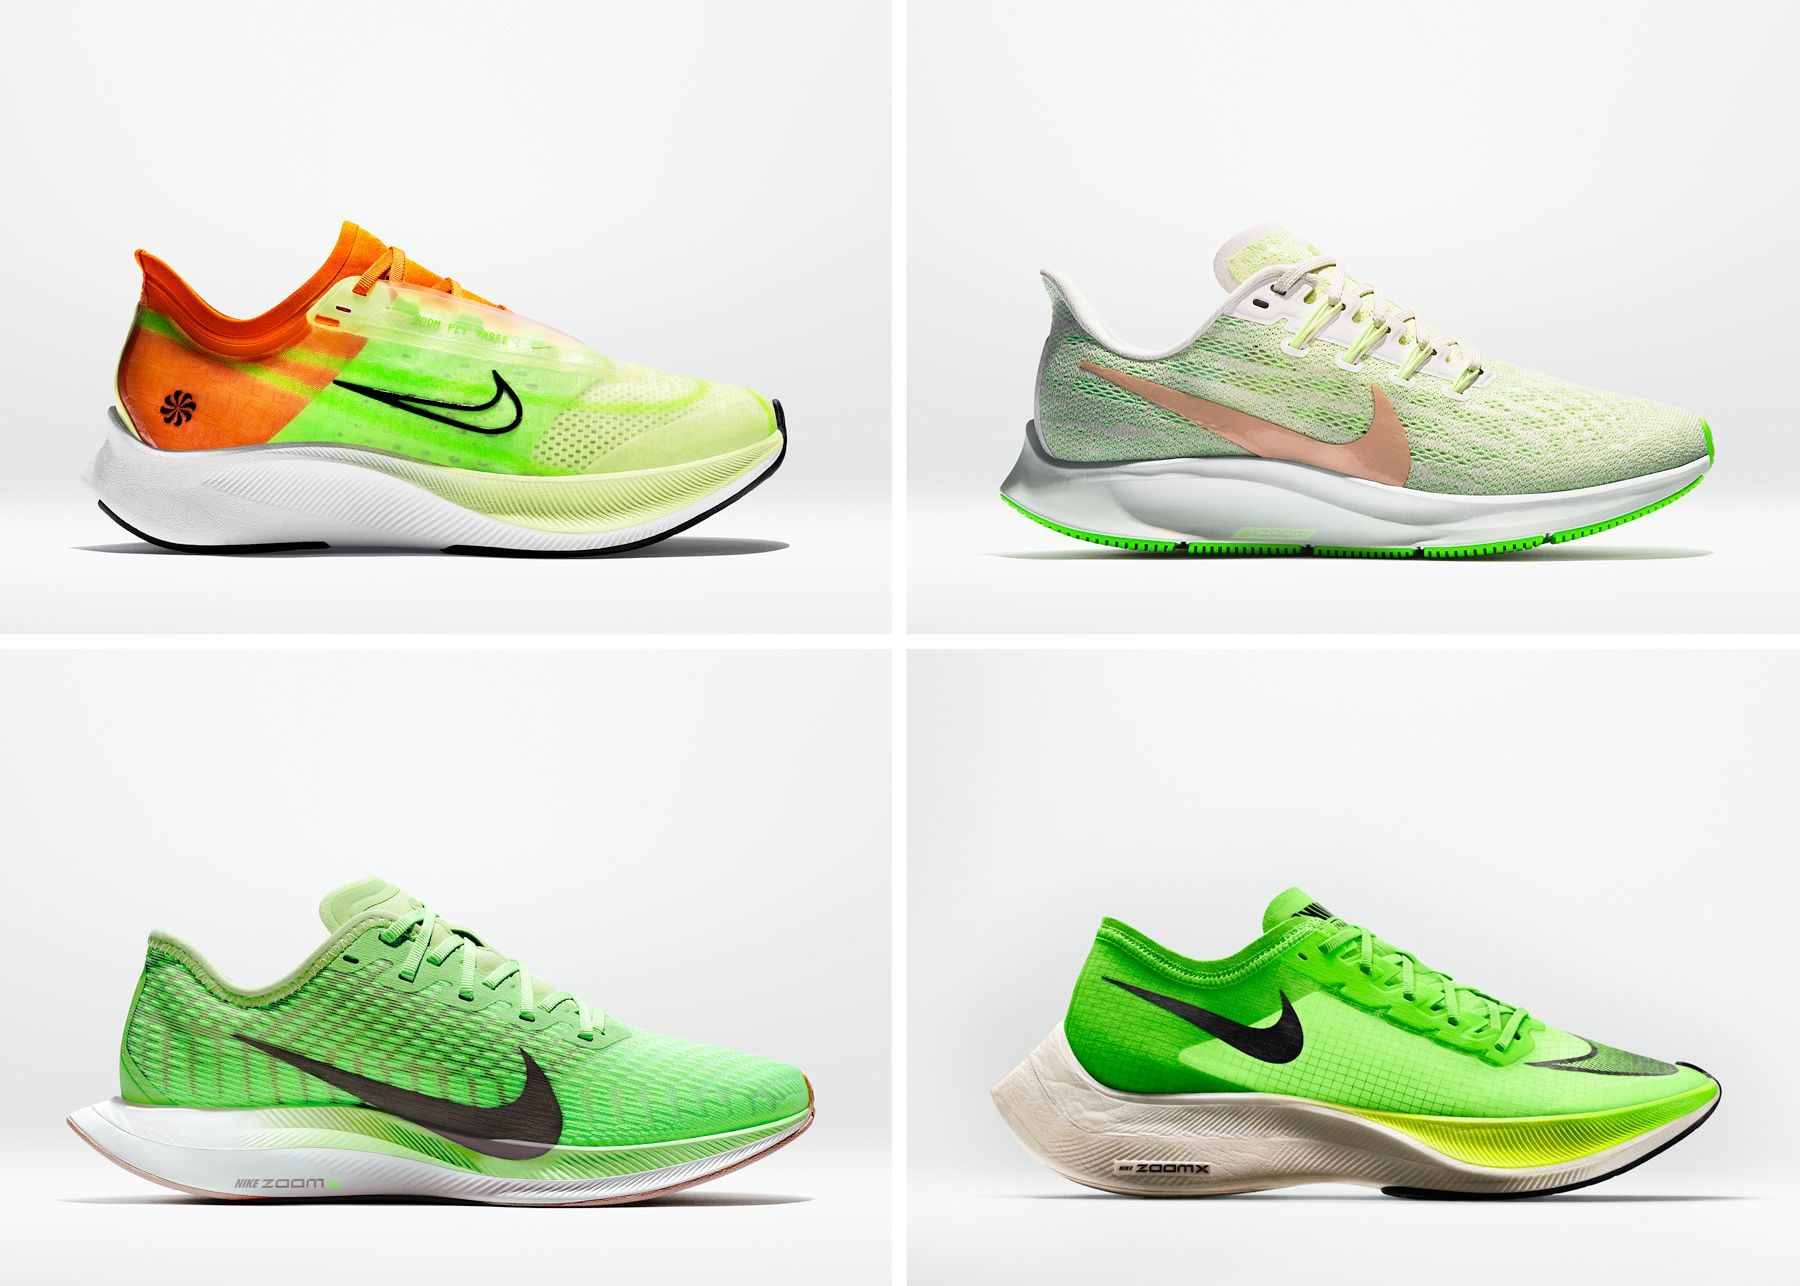 Nike Air Zoom Pegasus 36 and Zoom Fly 3 | New Nikes 2019